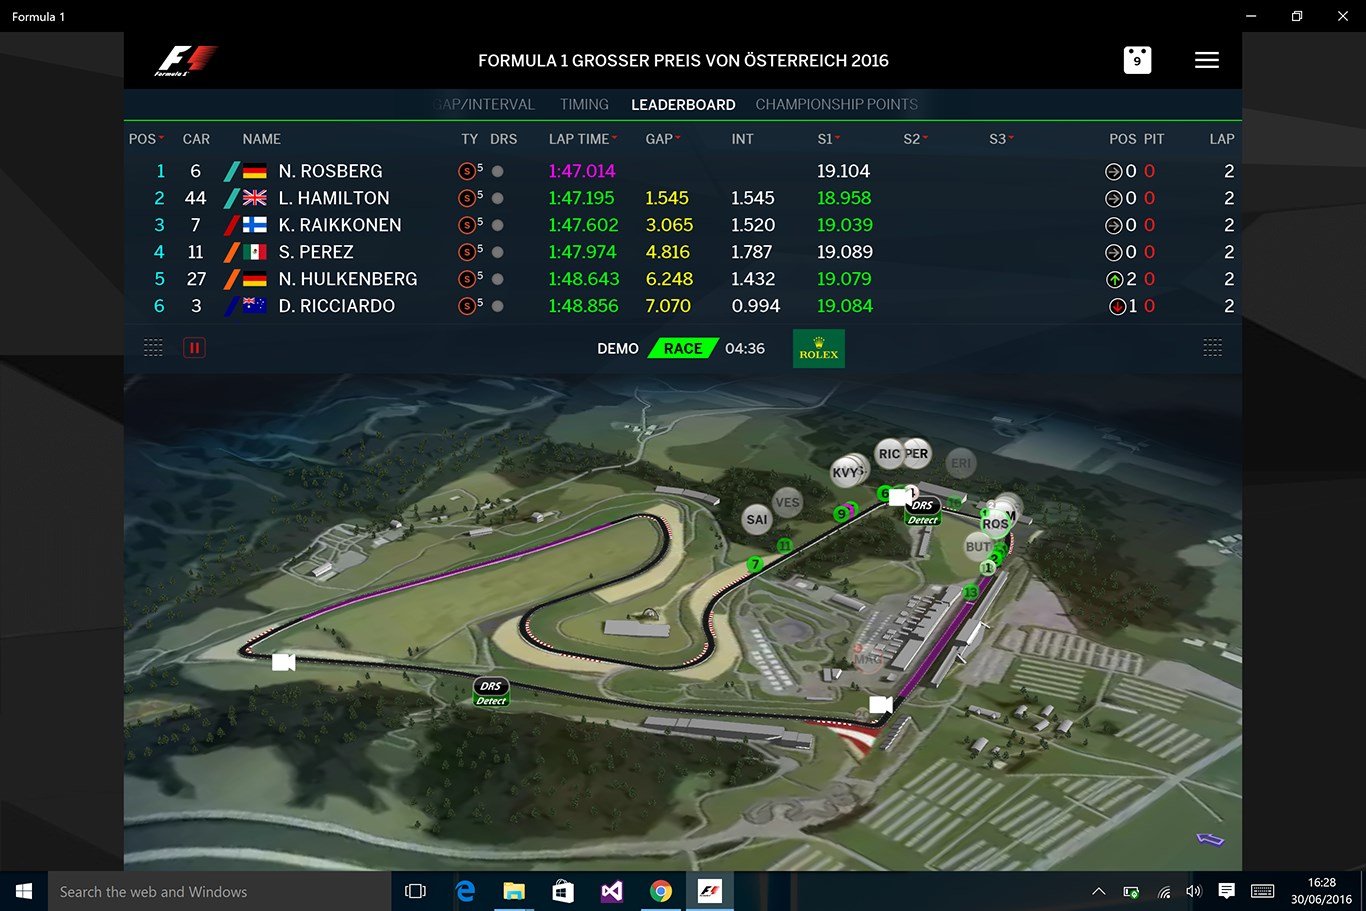 Official Formula 1 App Now Available For Windows 10 Devices